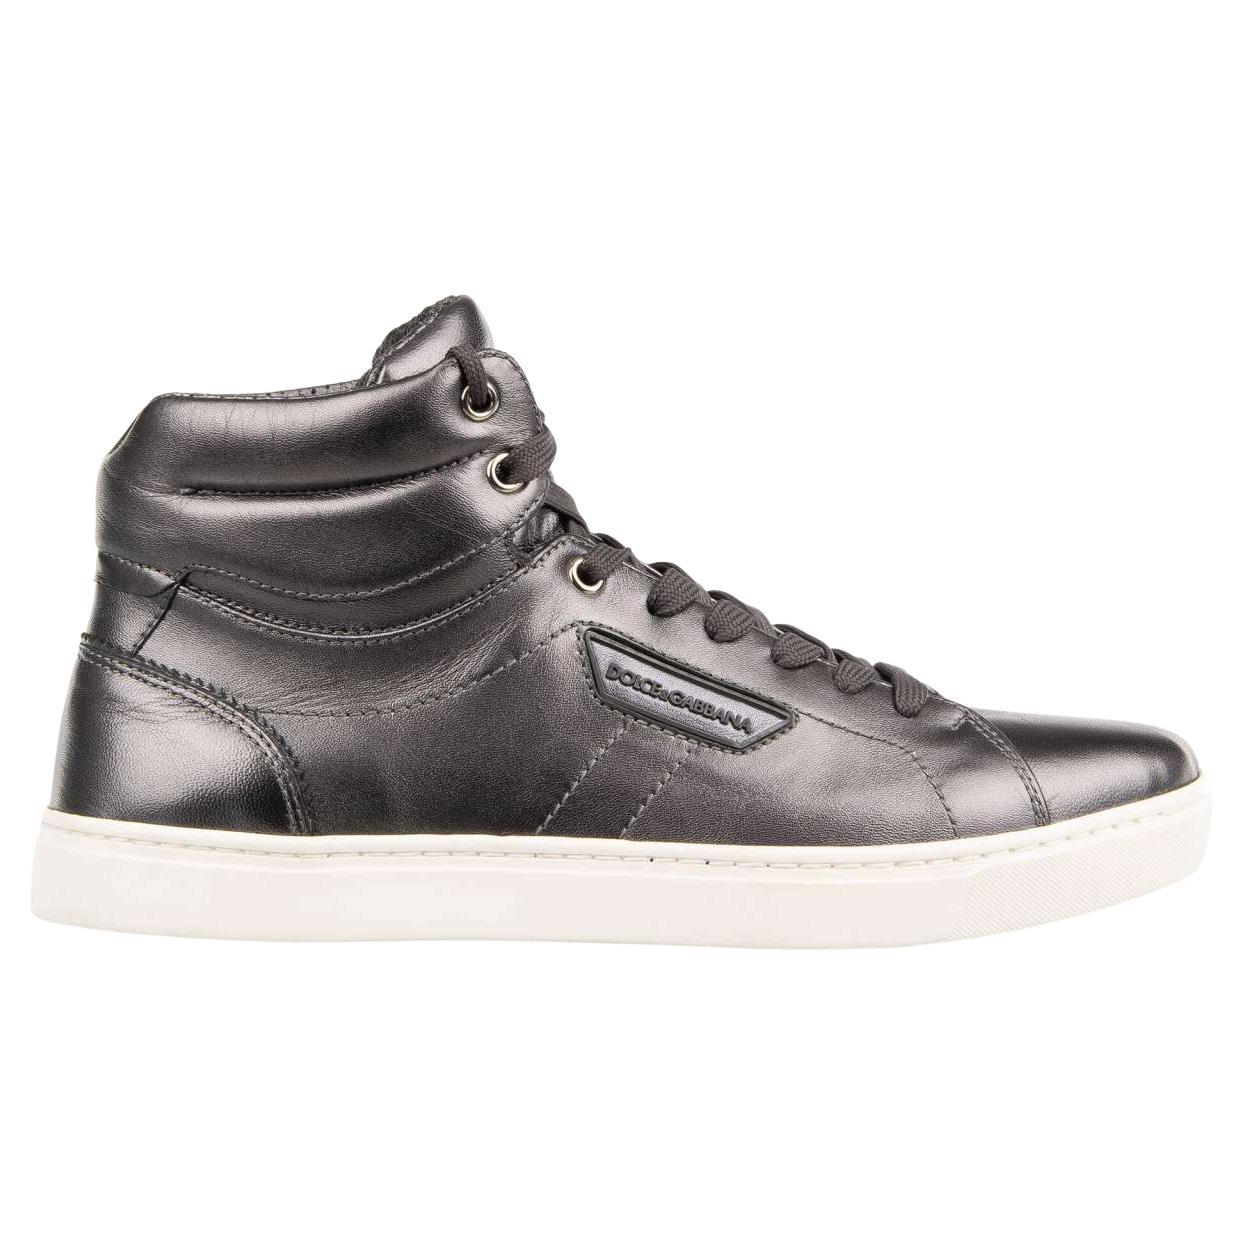 Dolce & Gabbana - High-Top Sneaker LONDON with DG Logo Plate Silver 39 UK 5 US 6 For Sale